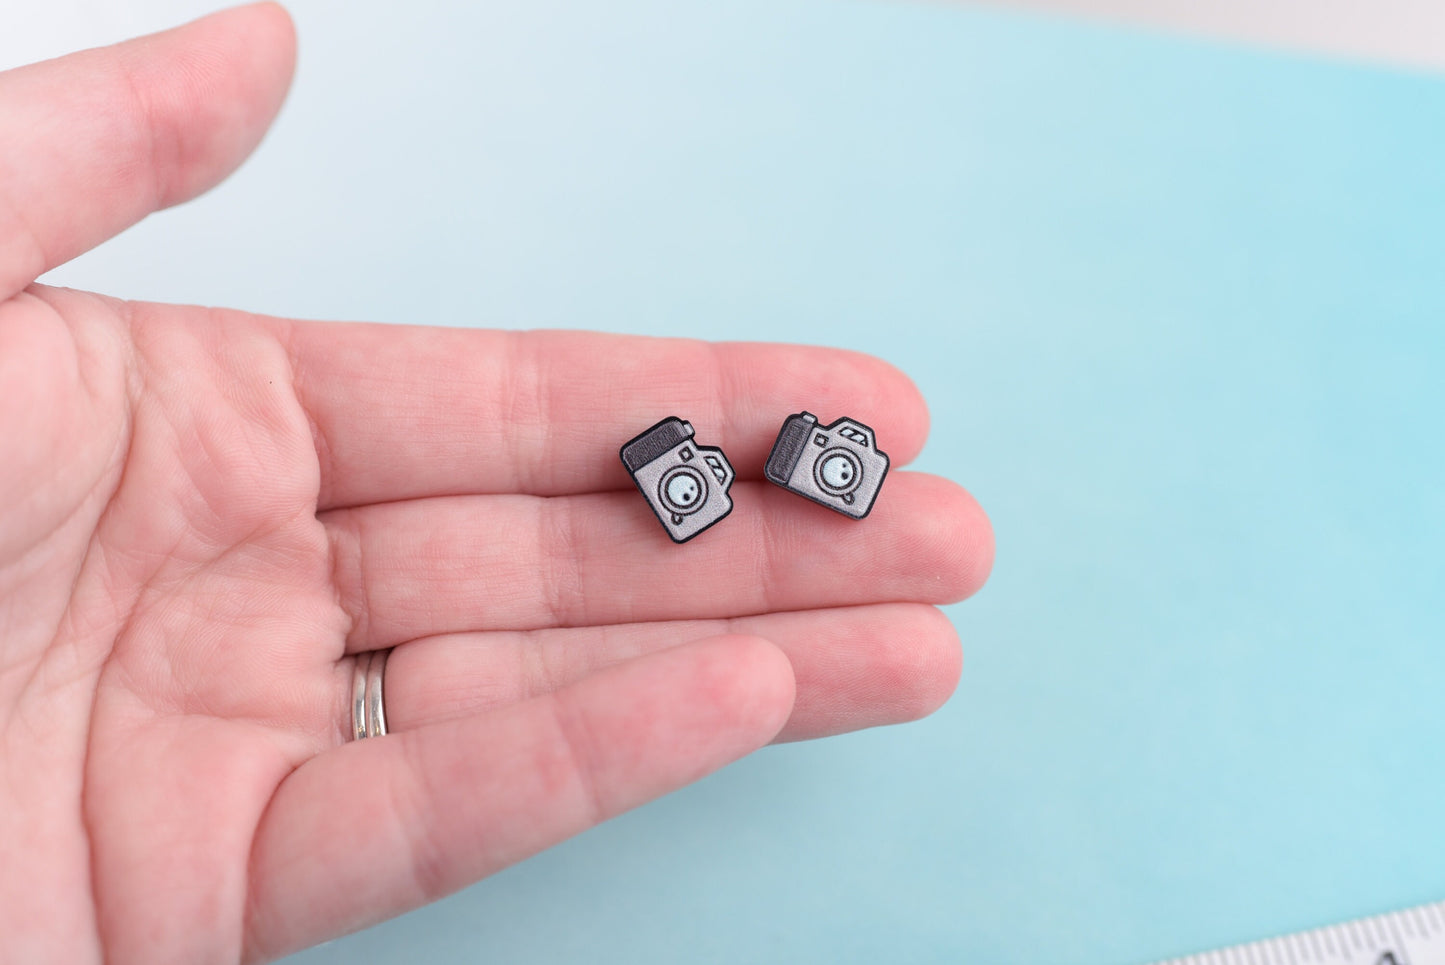 Acrylic Camera Earrings with Titanium Posts